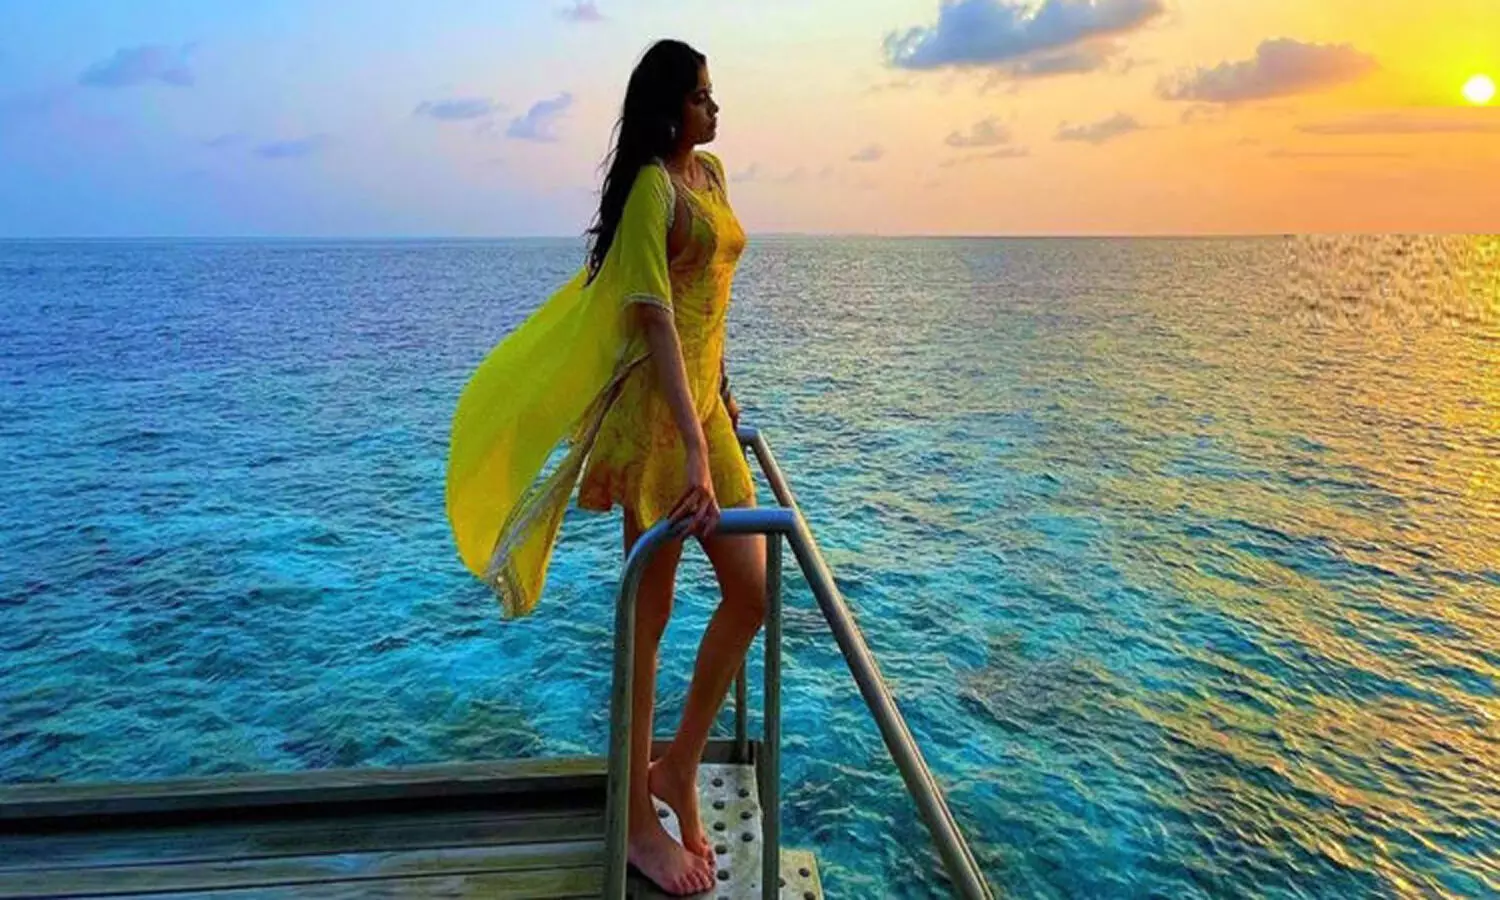 Janhvi Kapoor raises hotness bar in latest Maldives vacay PIC as she poses with her rock band crew